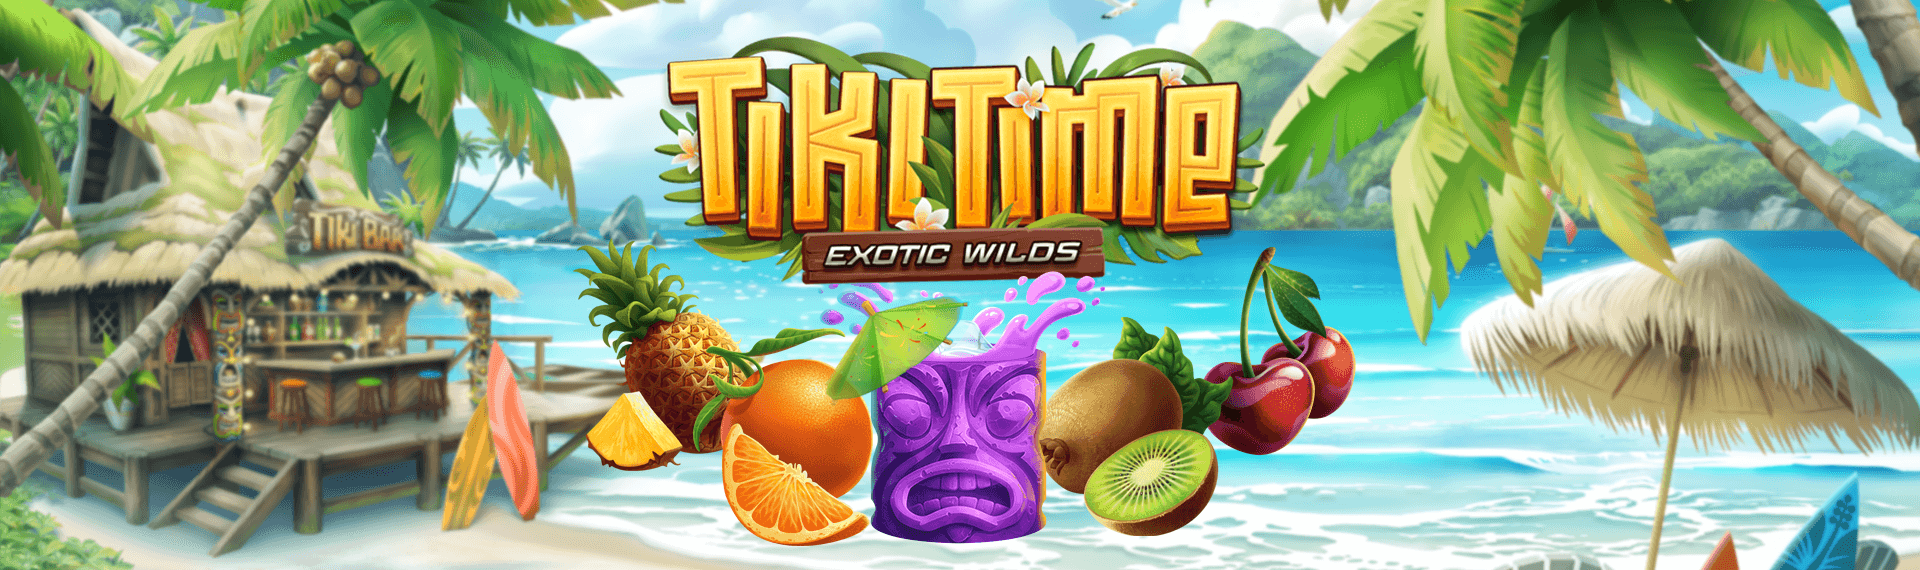 Tiki Time Exotic Wilds Screenshot <br />
<b>Notice</b>:  Undefined variable: key in <b>/var/www/html/wp-content/themes/armadillo/page-game.php</b> on line <b>37</b><br />
1